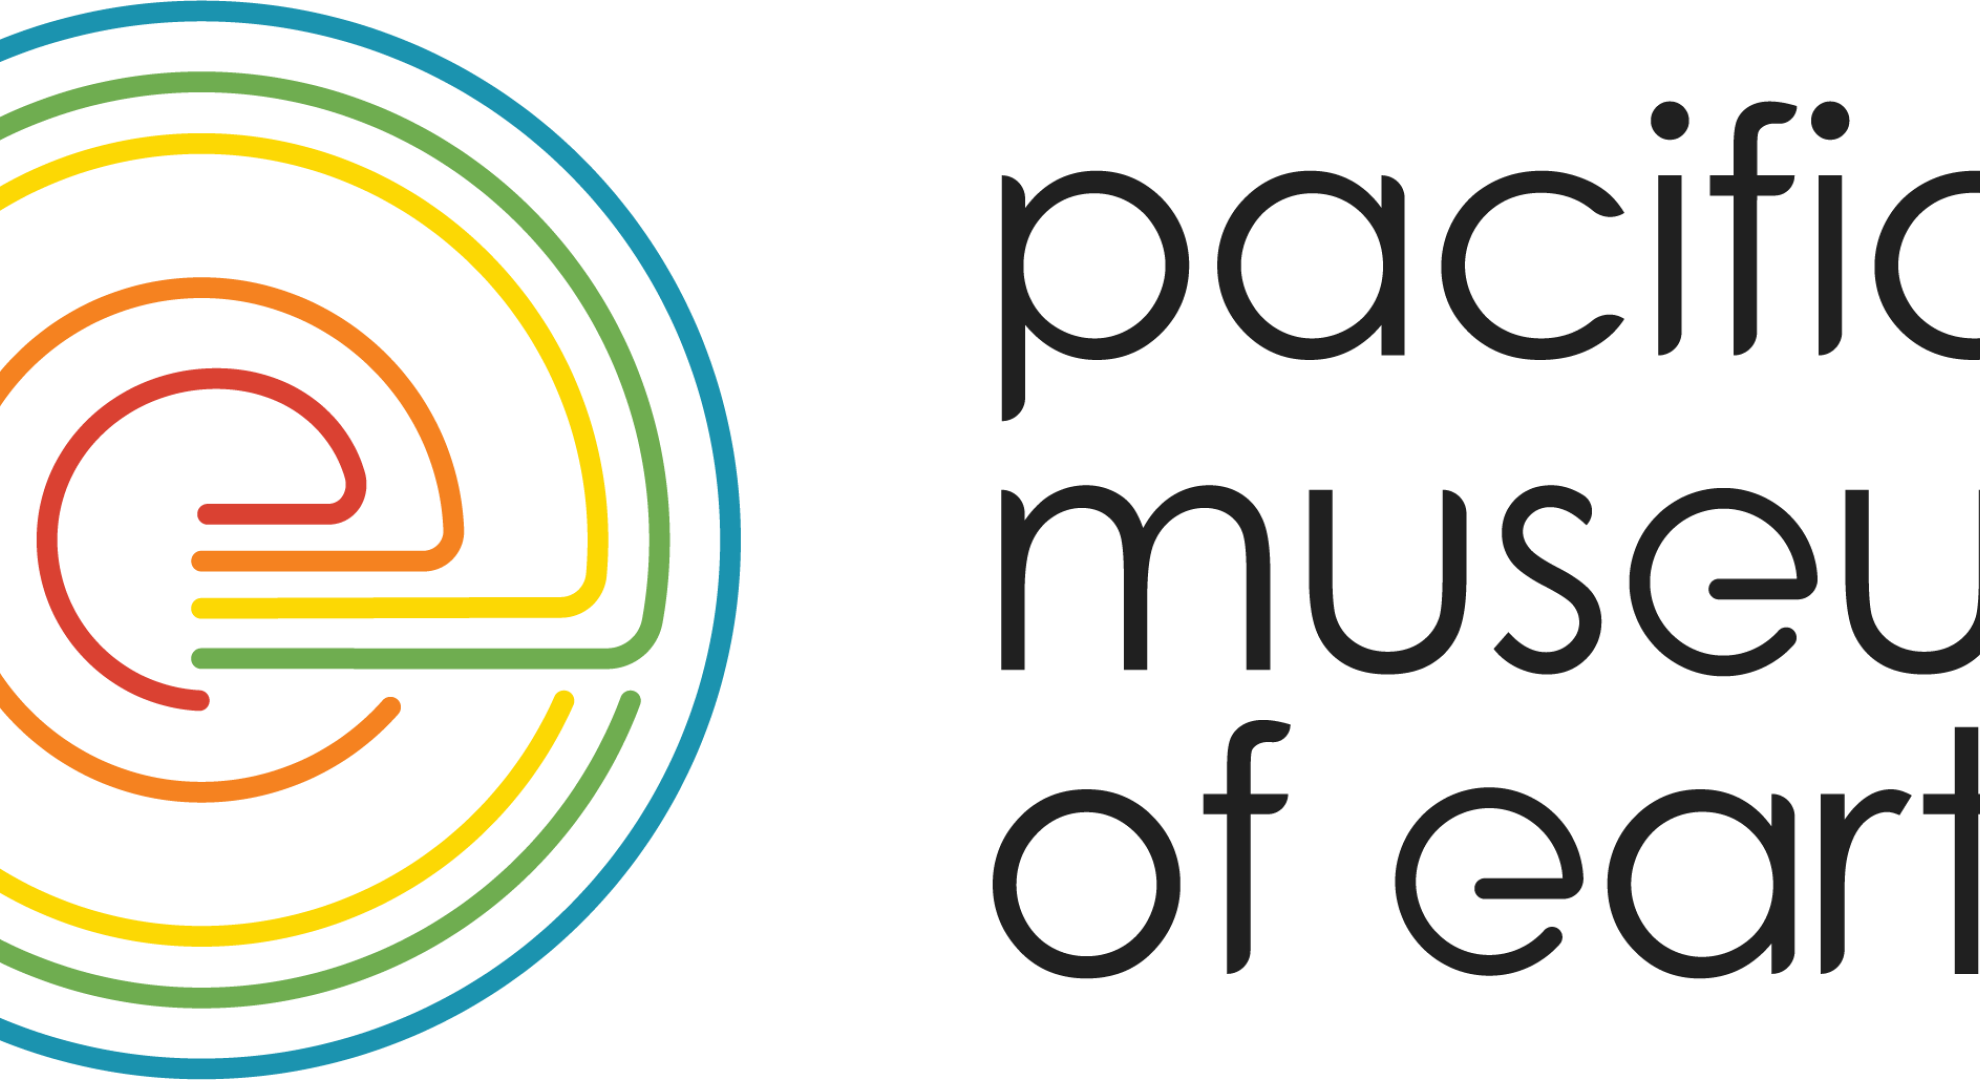 Pacific Museum of Earth logo